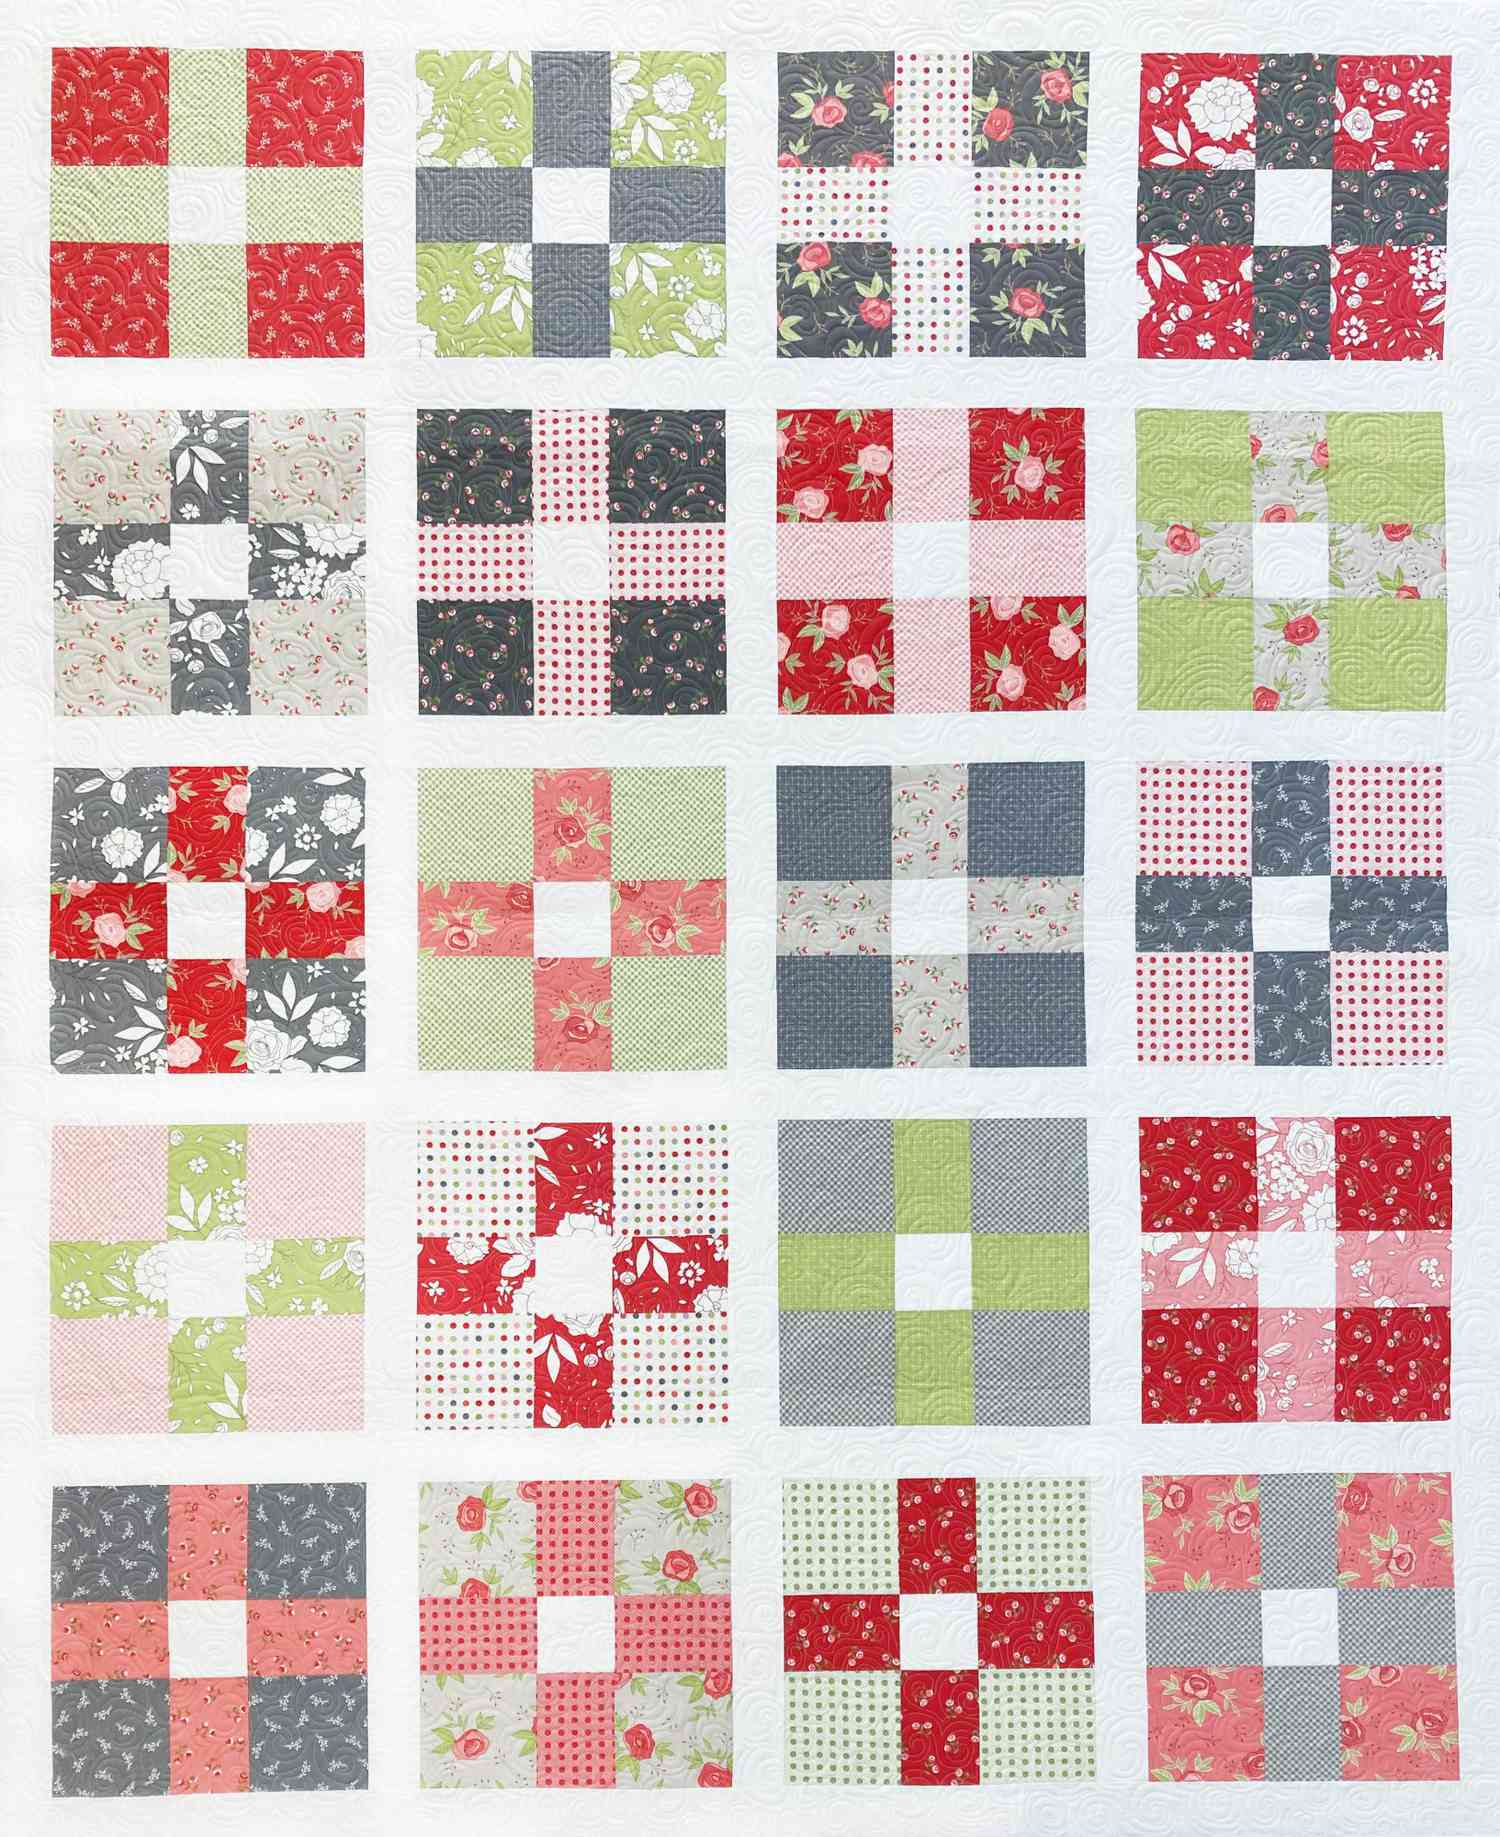 Plus sign quilt in gray, green, red, and pink fabric.